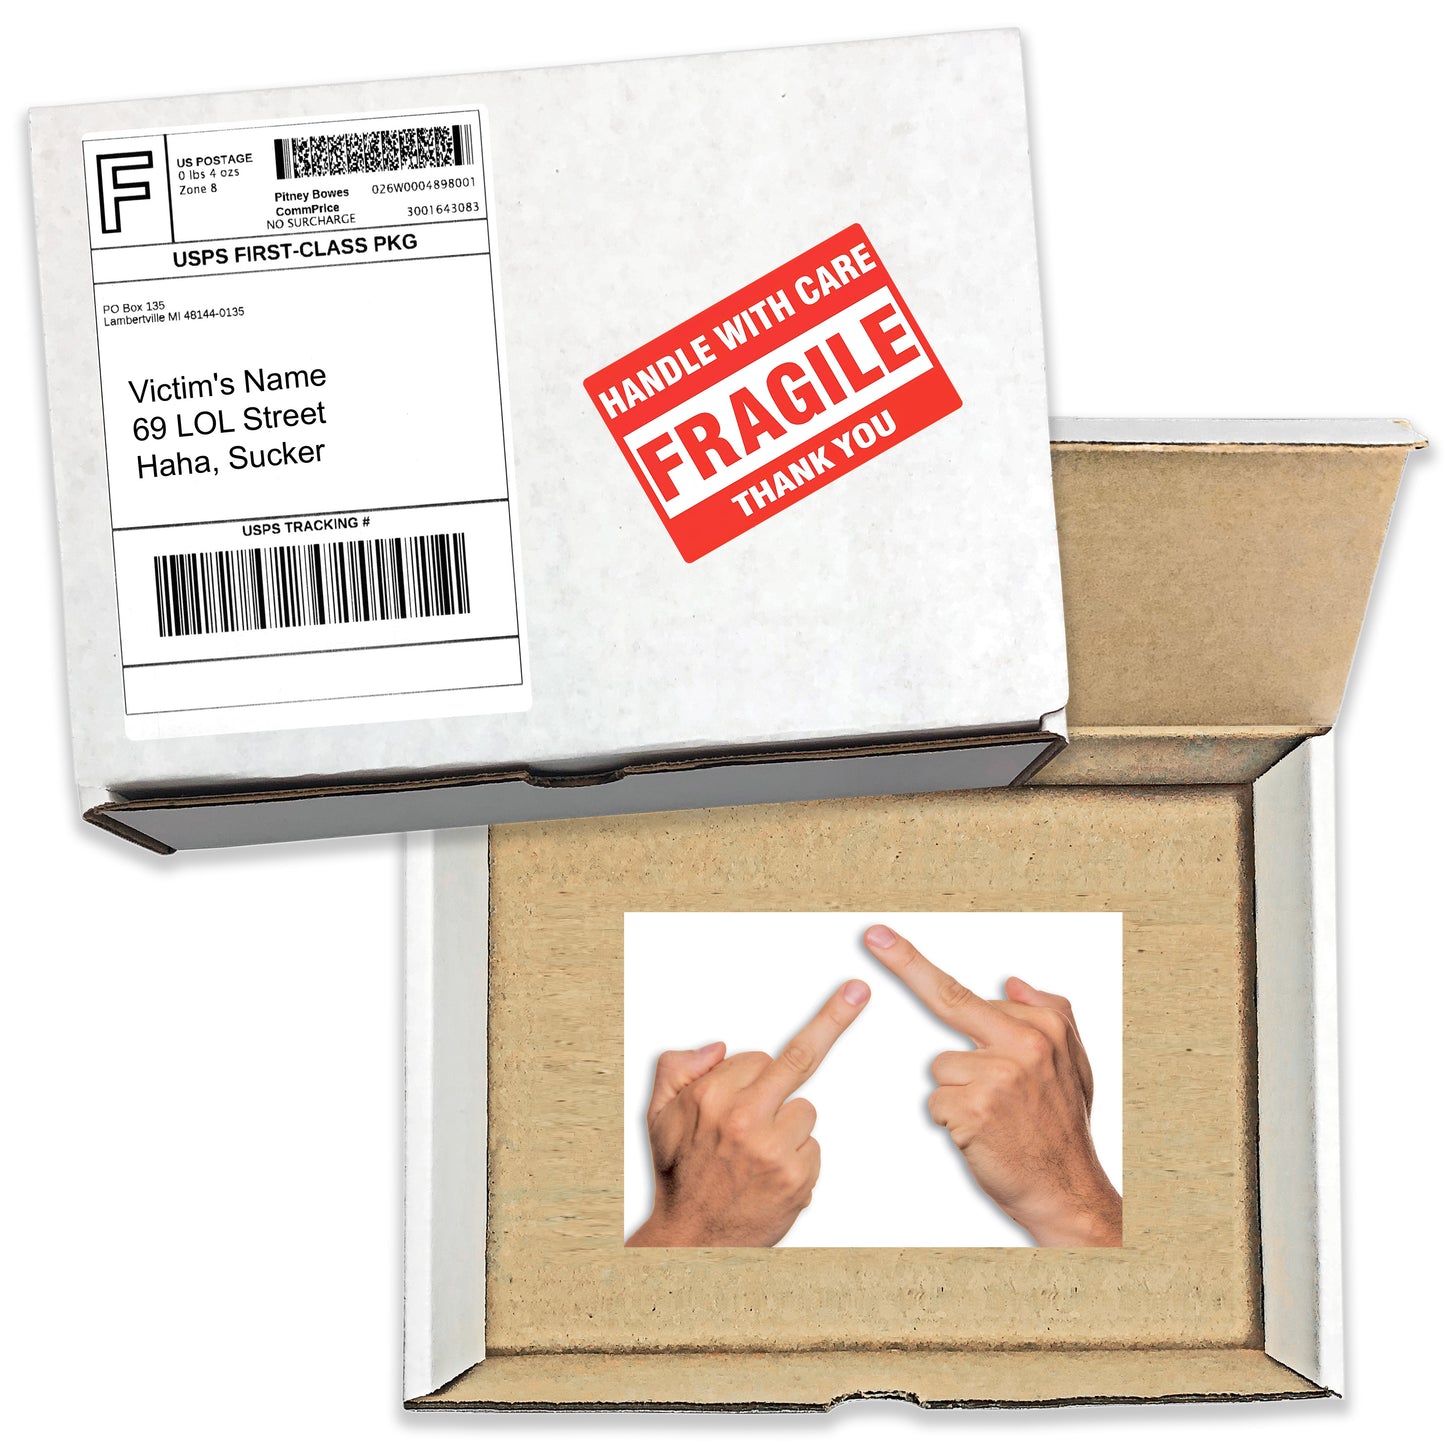 Double Middle Finger Surprise embarrassing prank box gets mailed directly to your victims 100% anonymously!